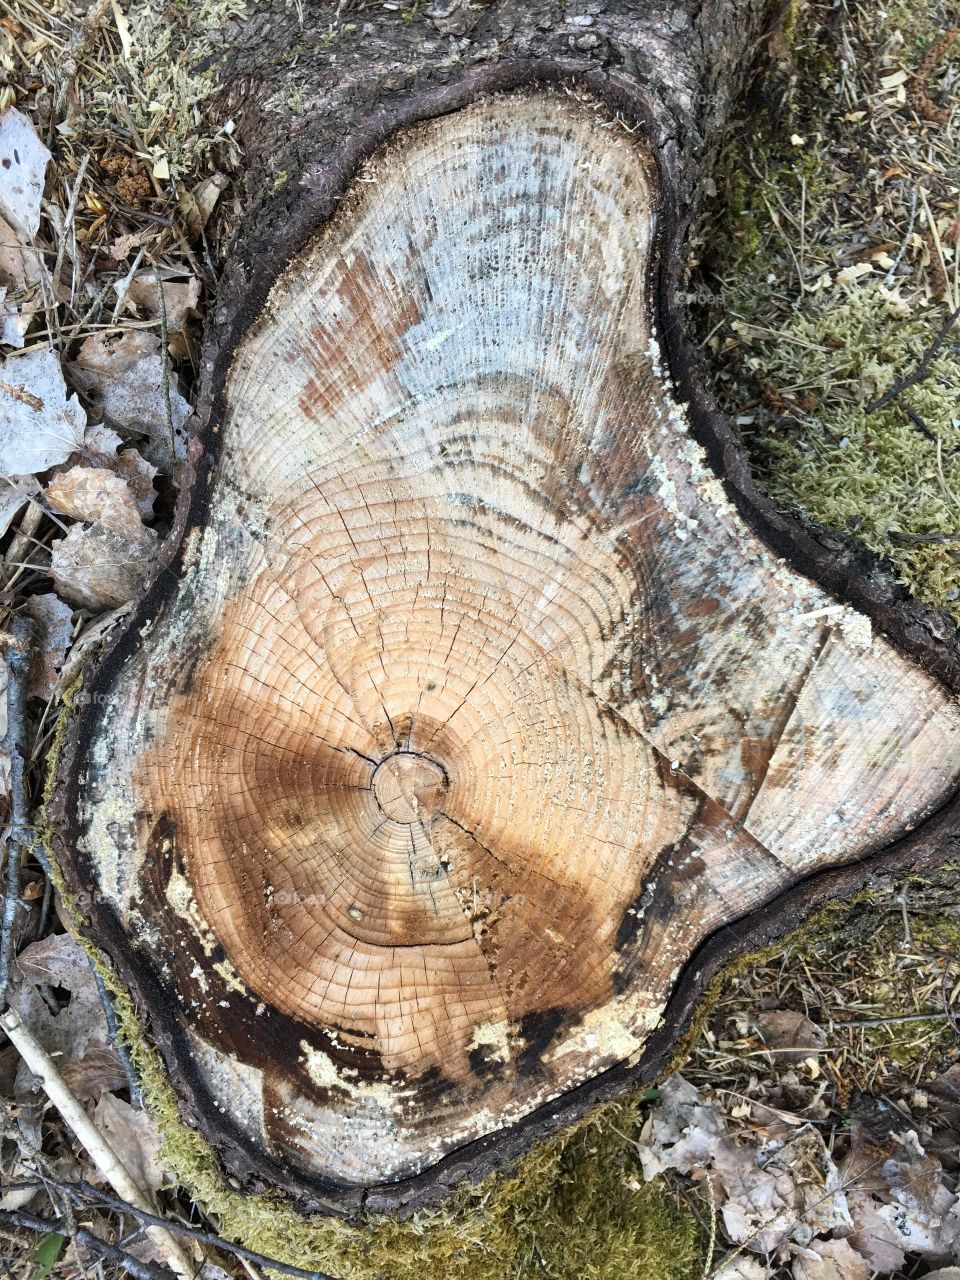 Rings on a tree stump after cutting